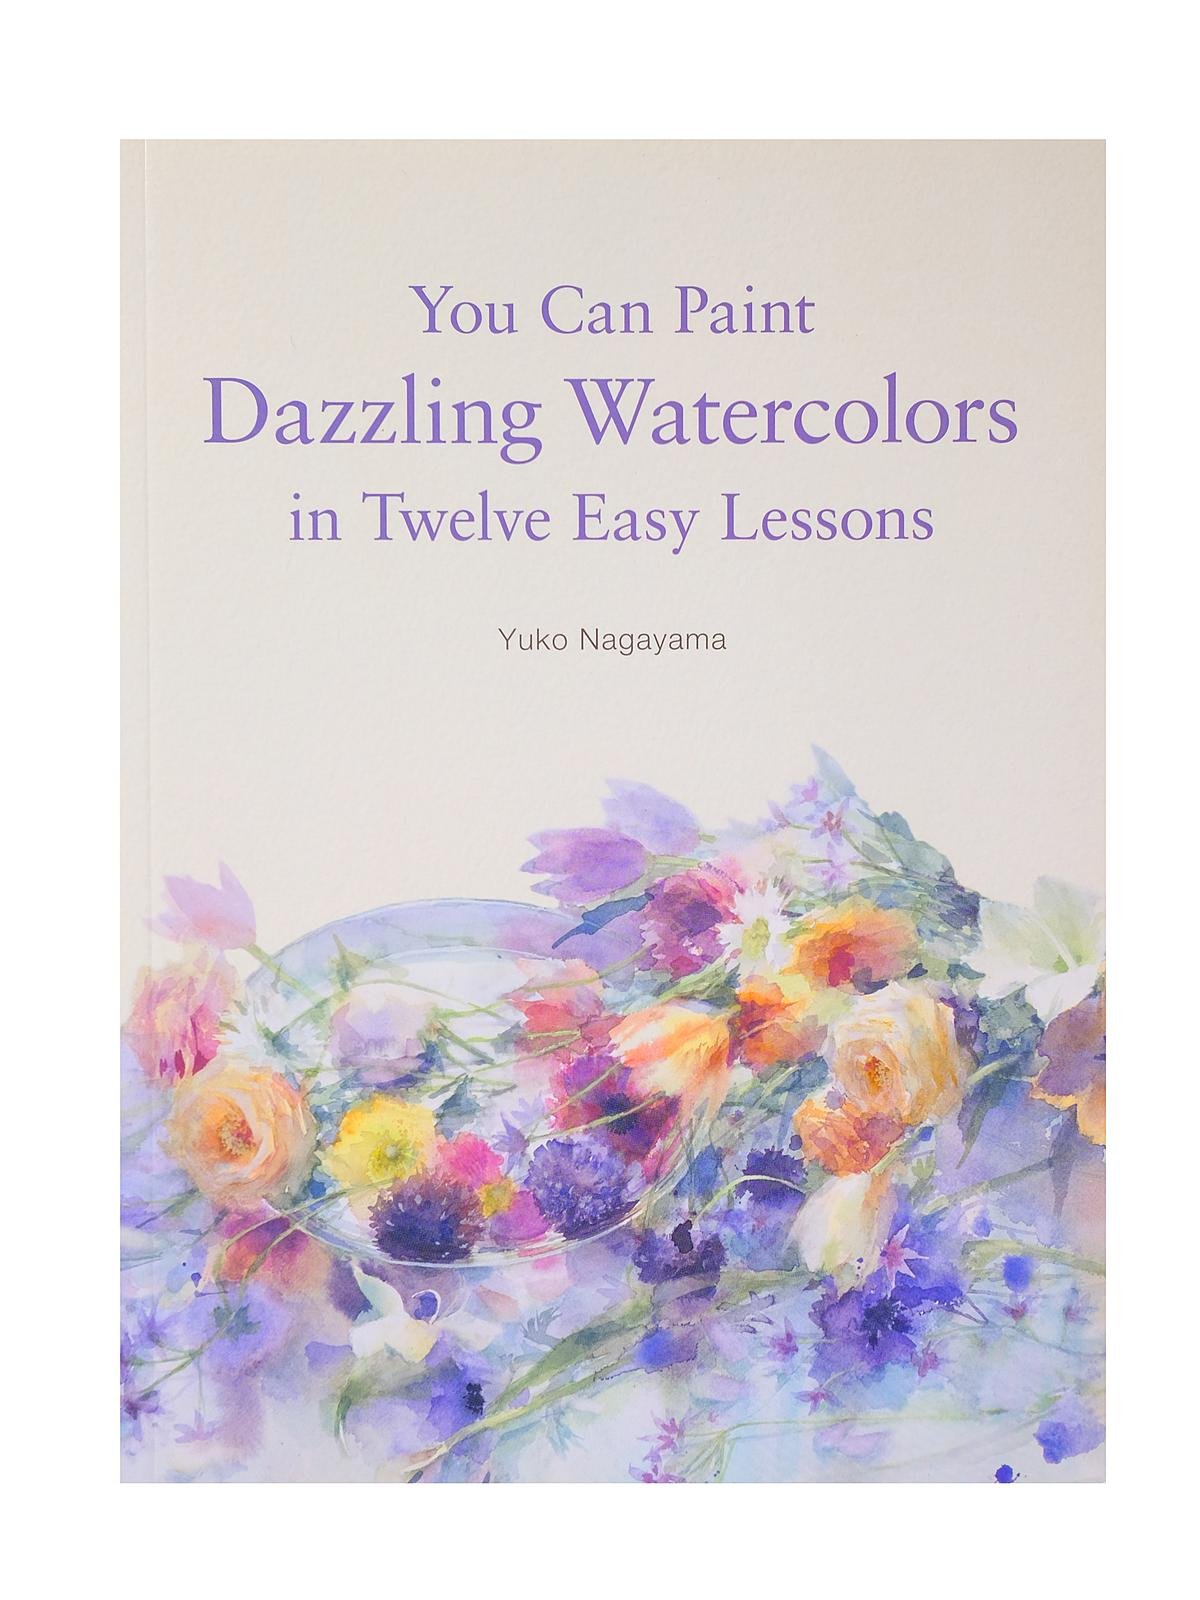 HarperCollins - You Can Paint Dazzling Watercolors